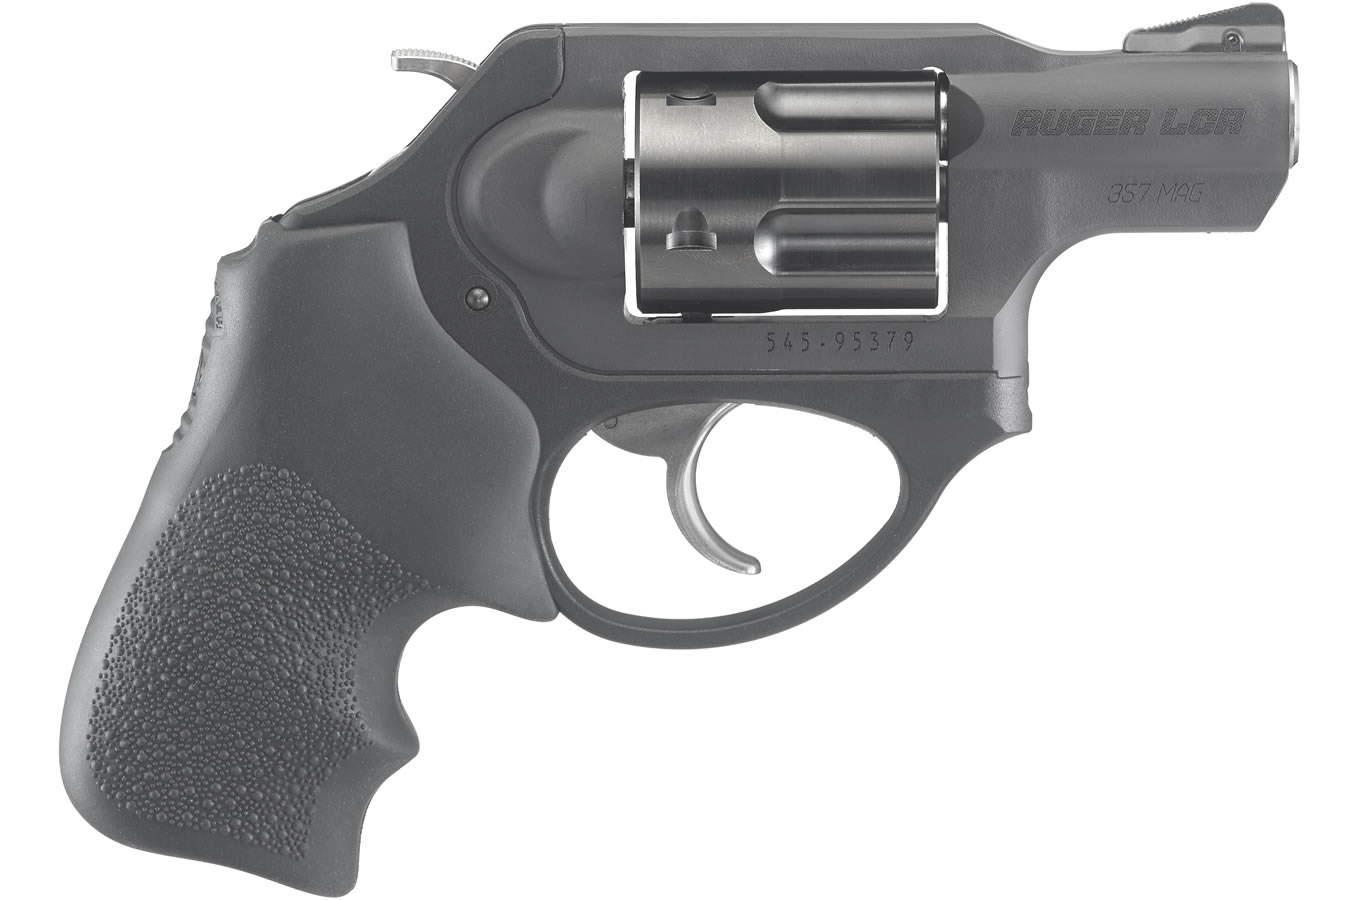 No. 15 Best Selling: RUGER LCRX 357 MAGNUM DOUBLE-ACTION REVOLVER